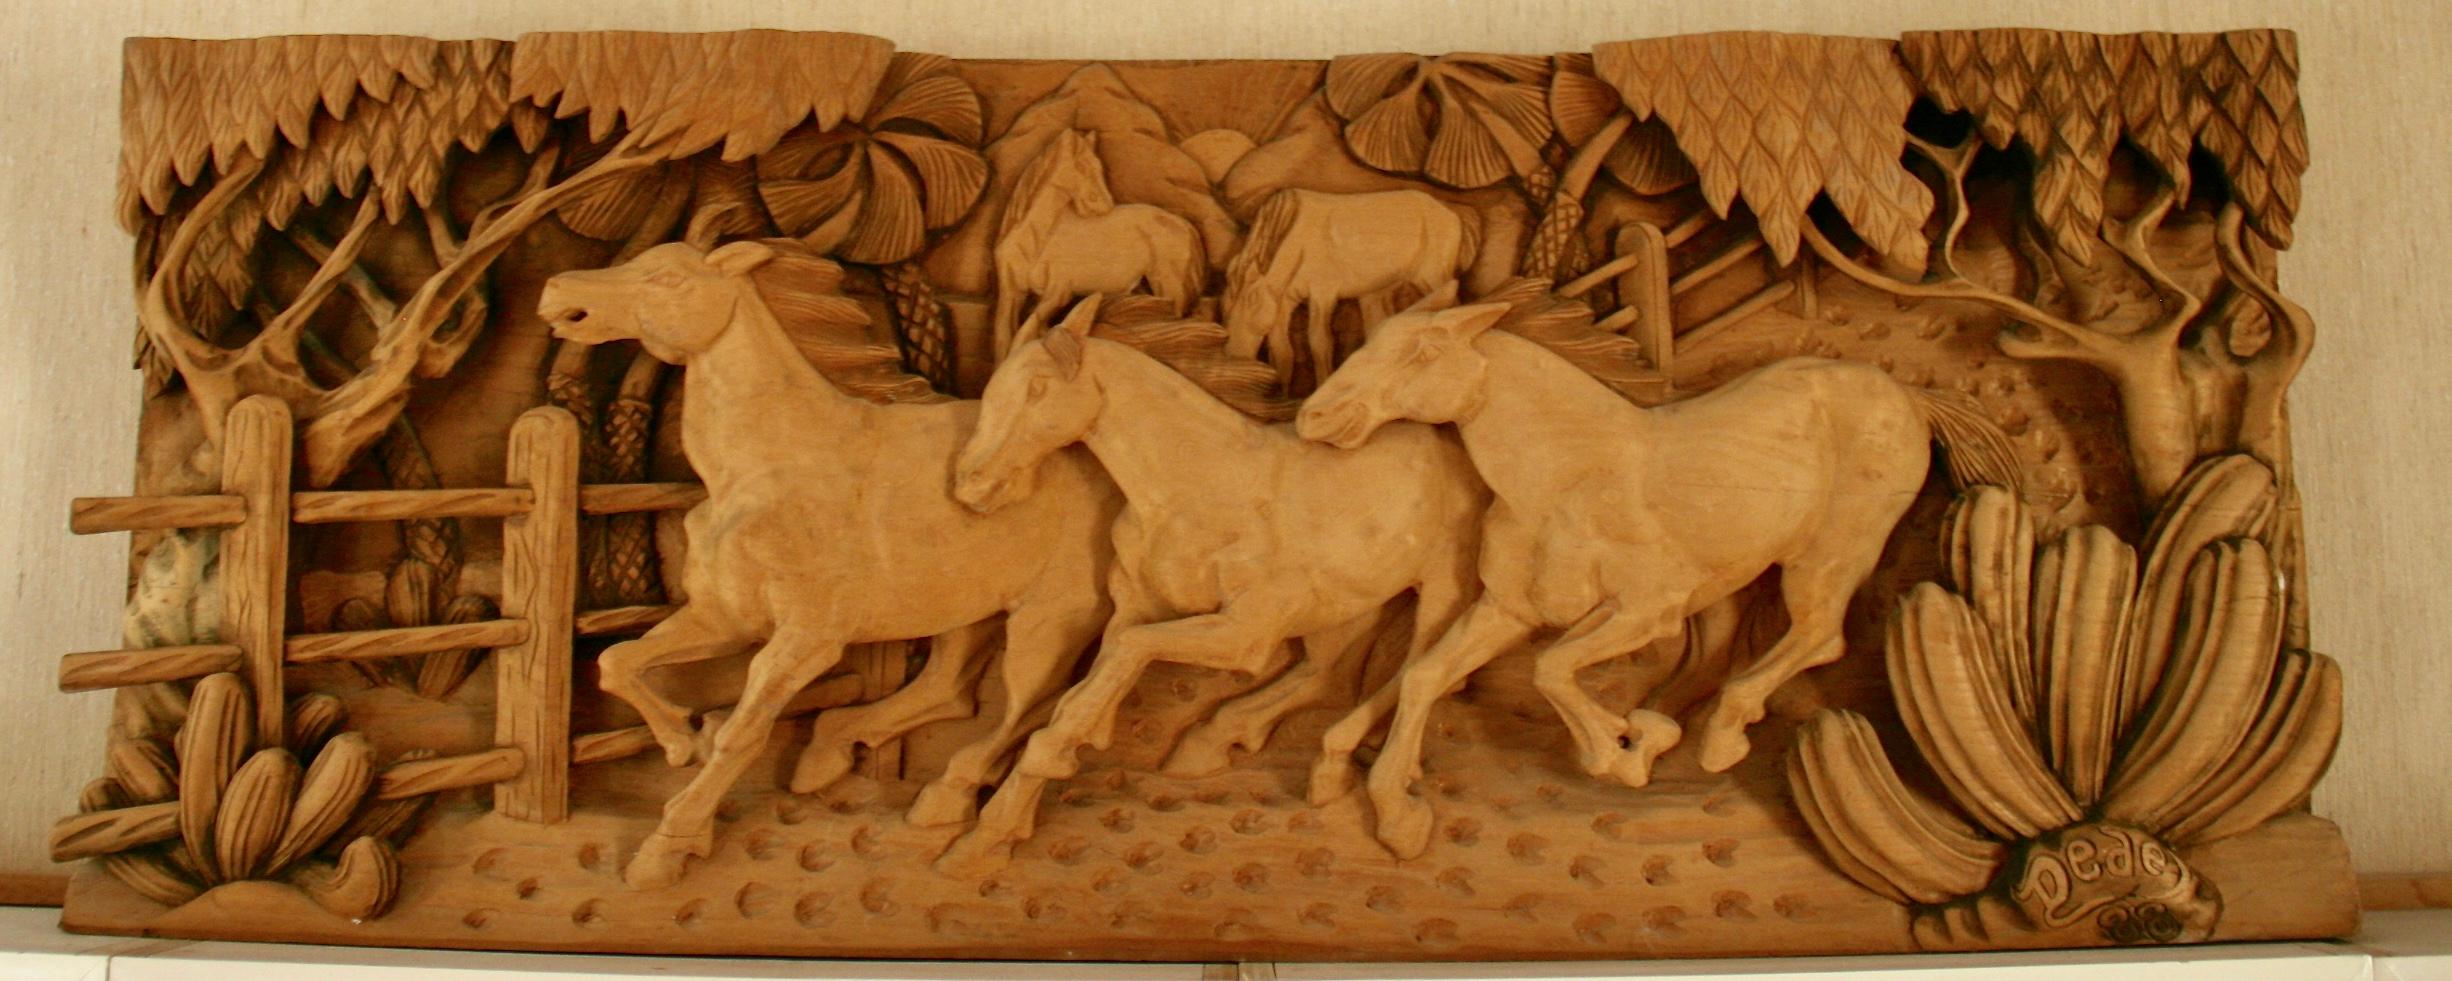  Large Scale Western Wood Sculpture 3